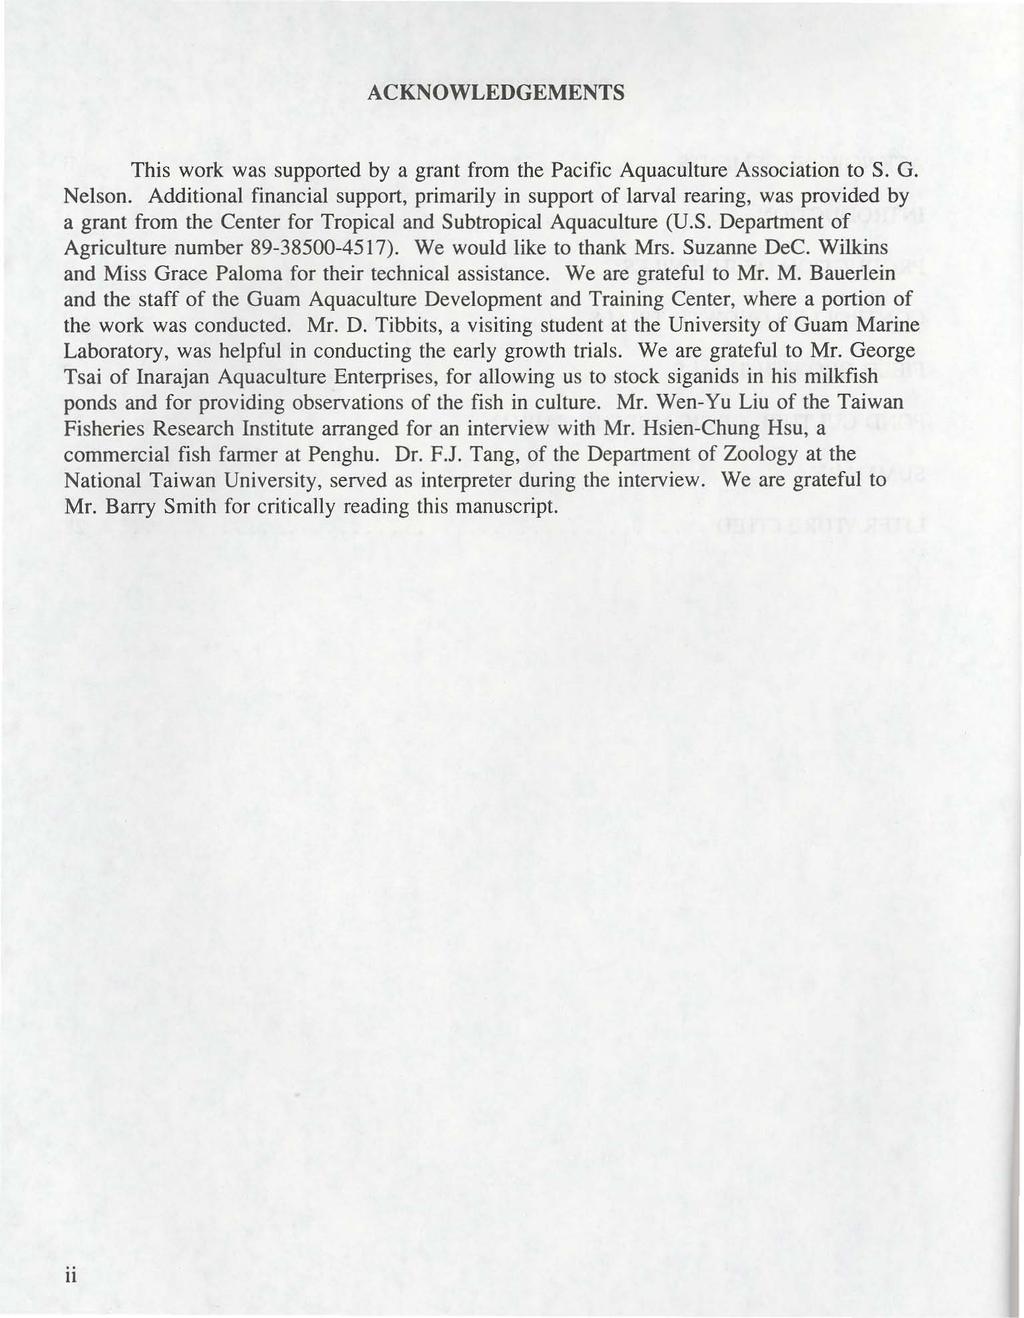 ACKNOWLEDGEMENTS This work was supported by a grant from the Pacific Aquaculture Association to S. G. Nelson.